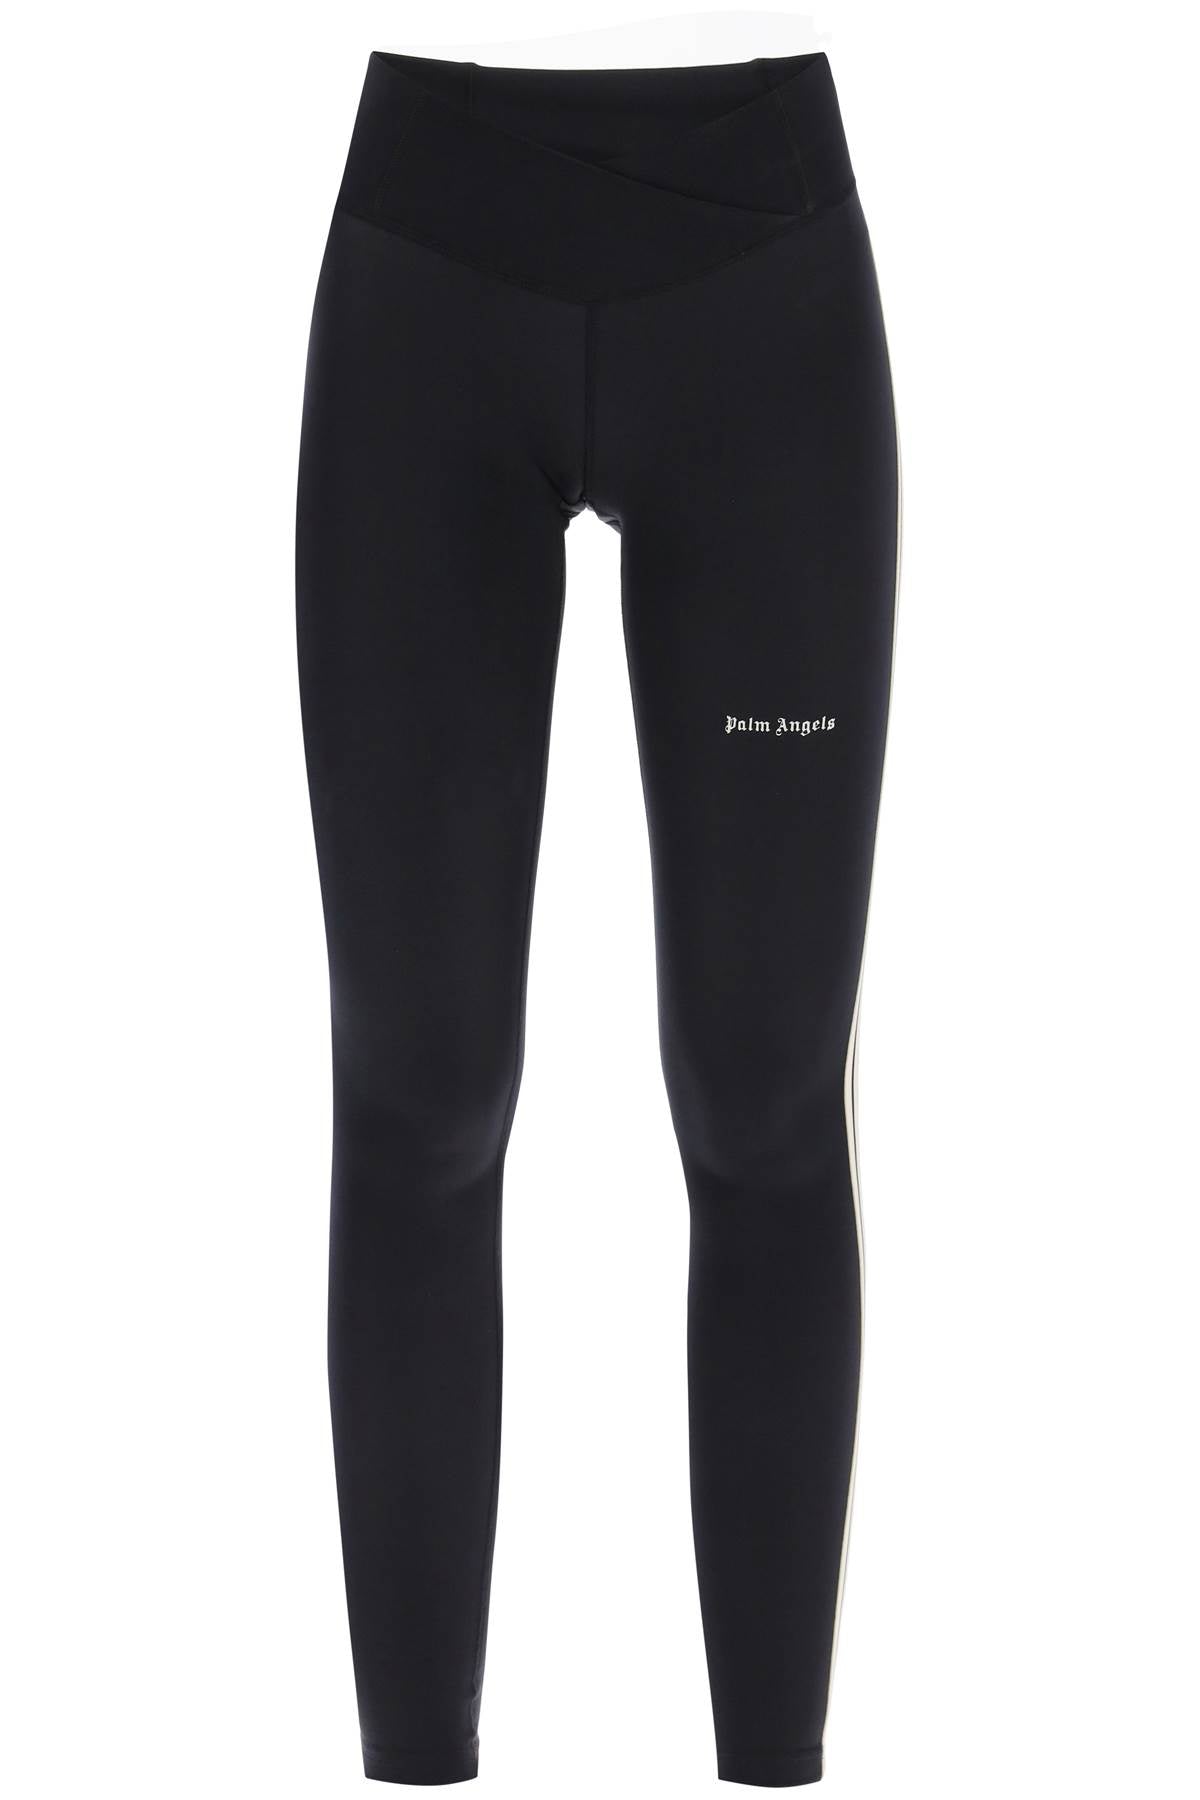 Palm angels leggings with contrasting side bands-0